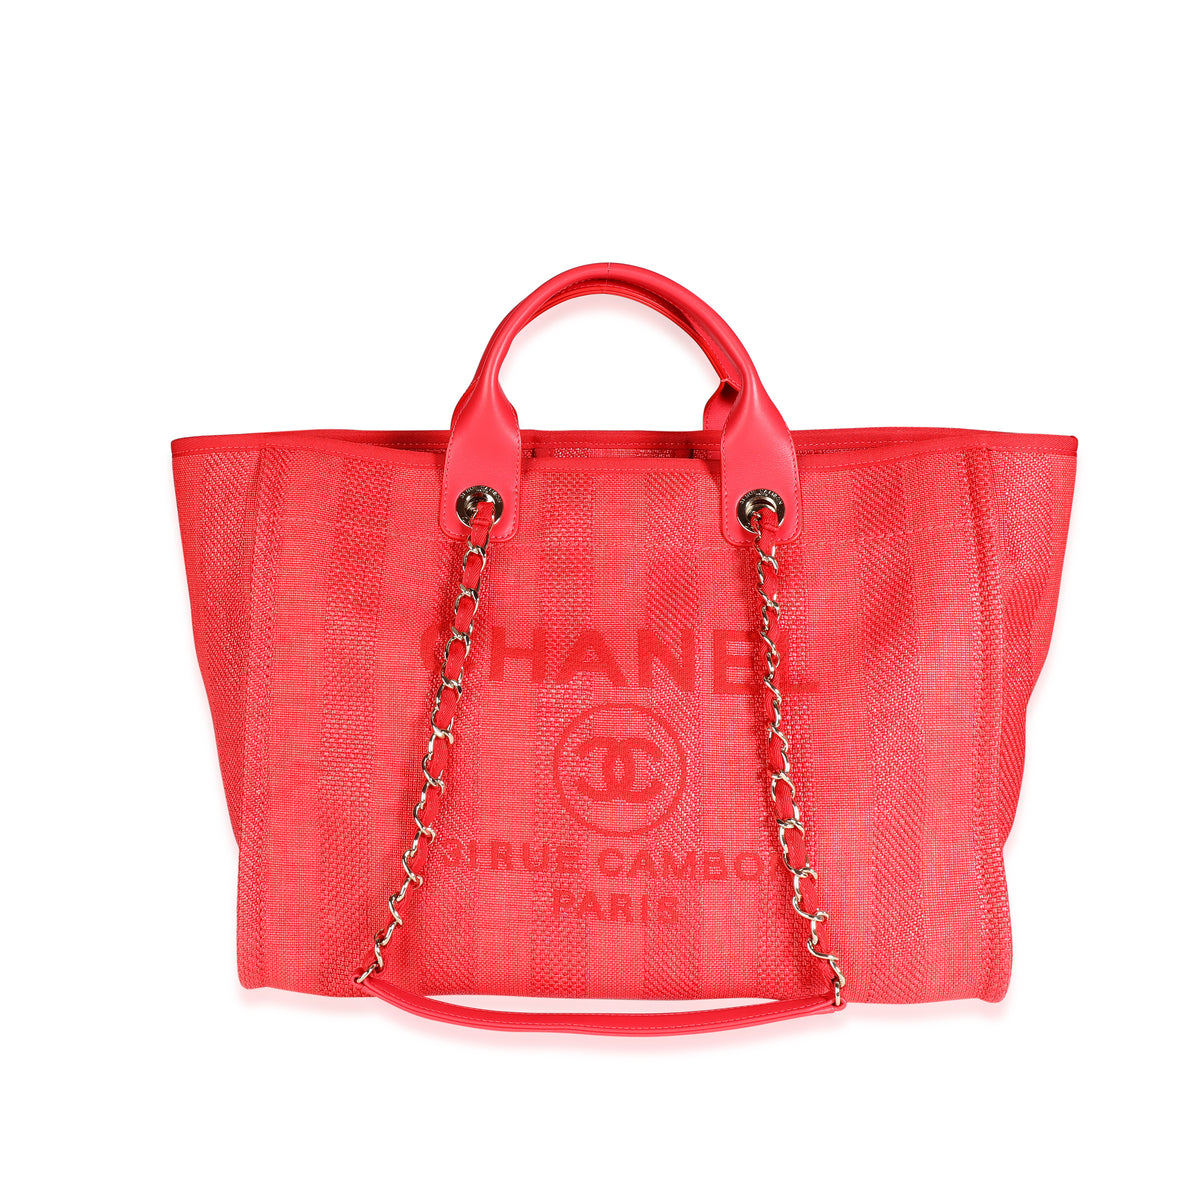 Chanel Red Canvas & Leather Large Deauville Tote, myGemma